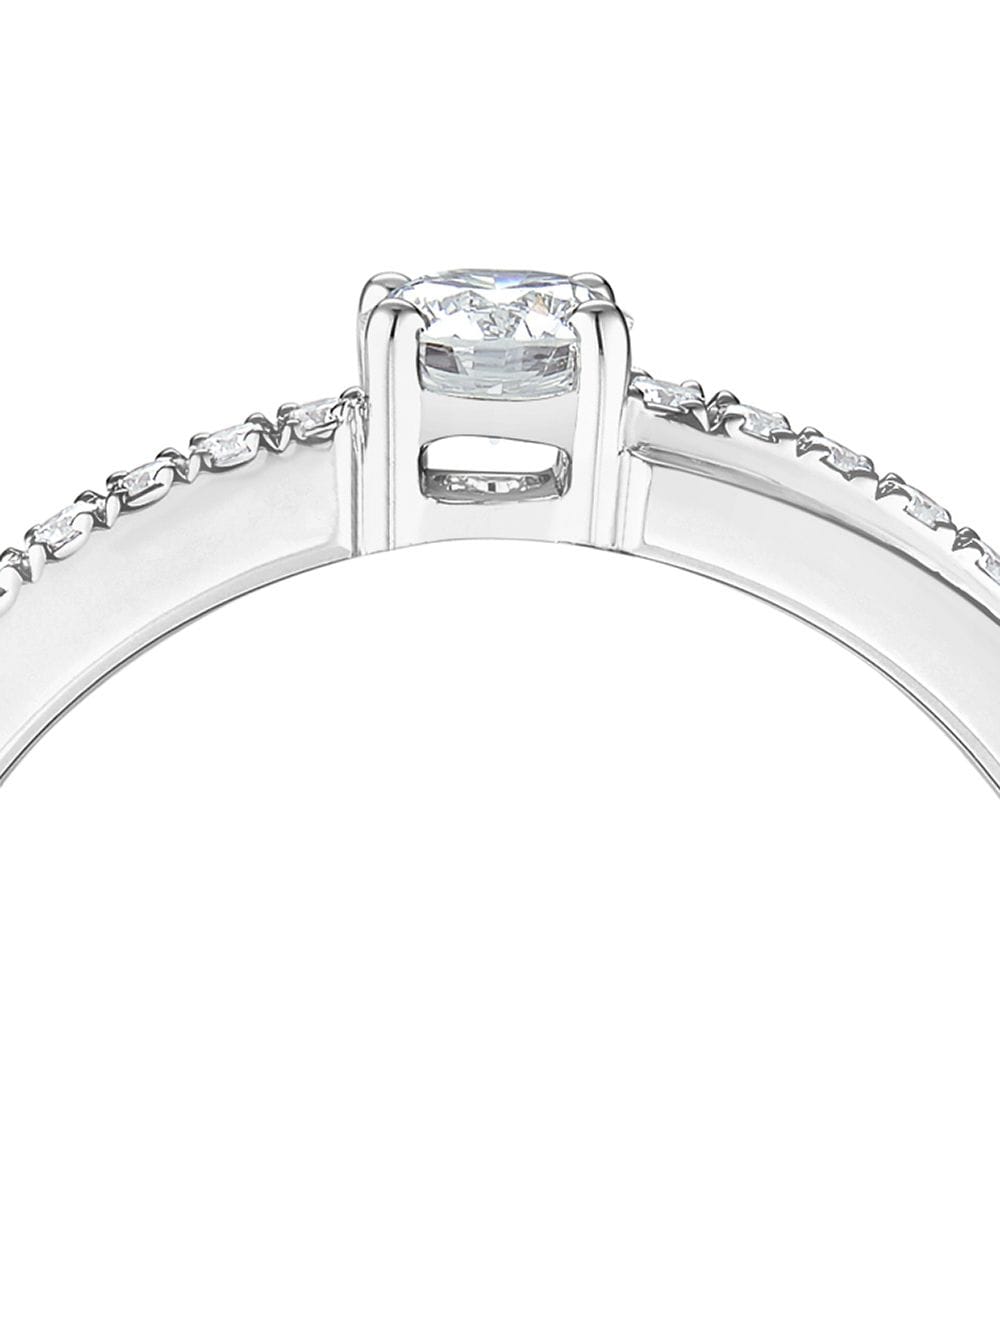 18KT WHITE GOLD THE PROMISE SMALL SOLITAIRE ROUND BRILLIANT DIAMOND RING